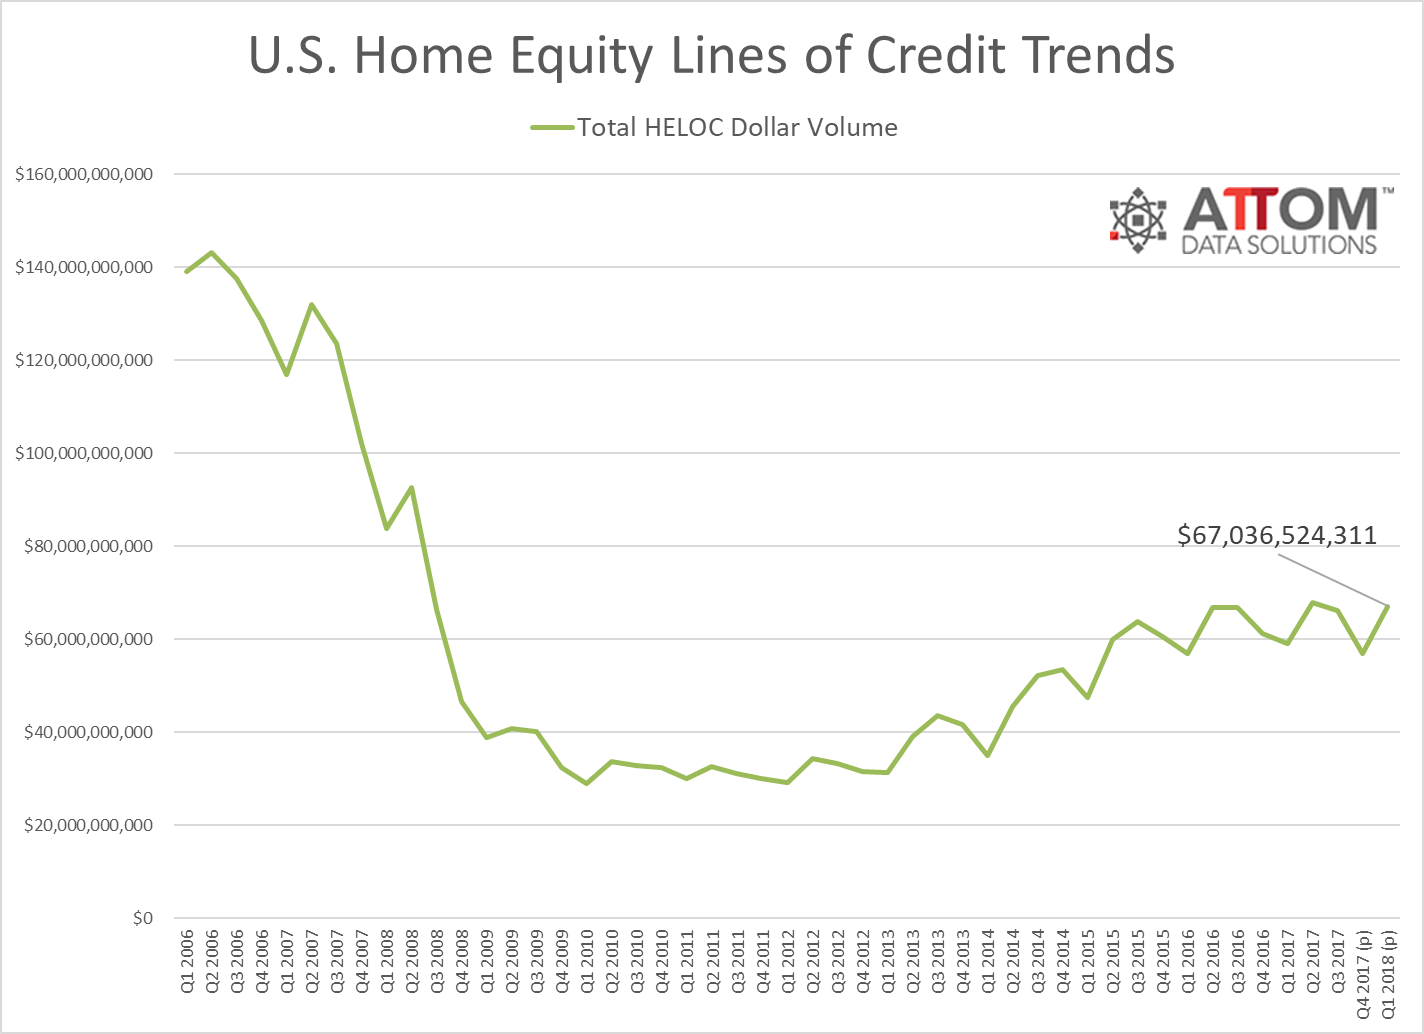 The first quarter of this year saw a spike in activity related to home equity lines of credit (HELOC), according to new statistics from ATTOM Data Solutions